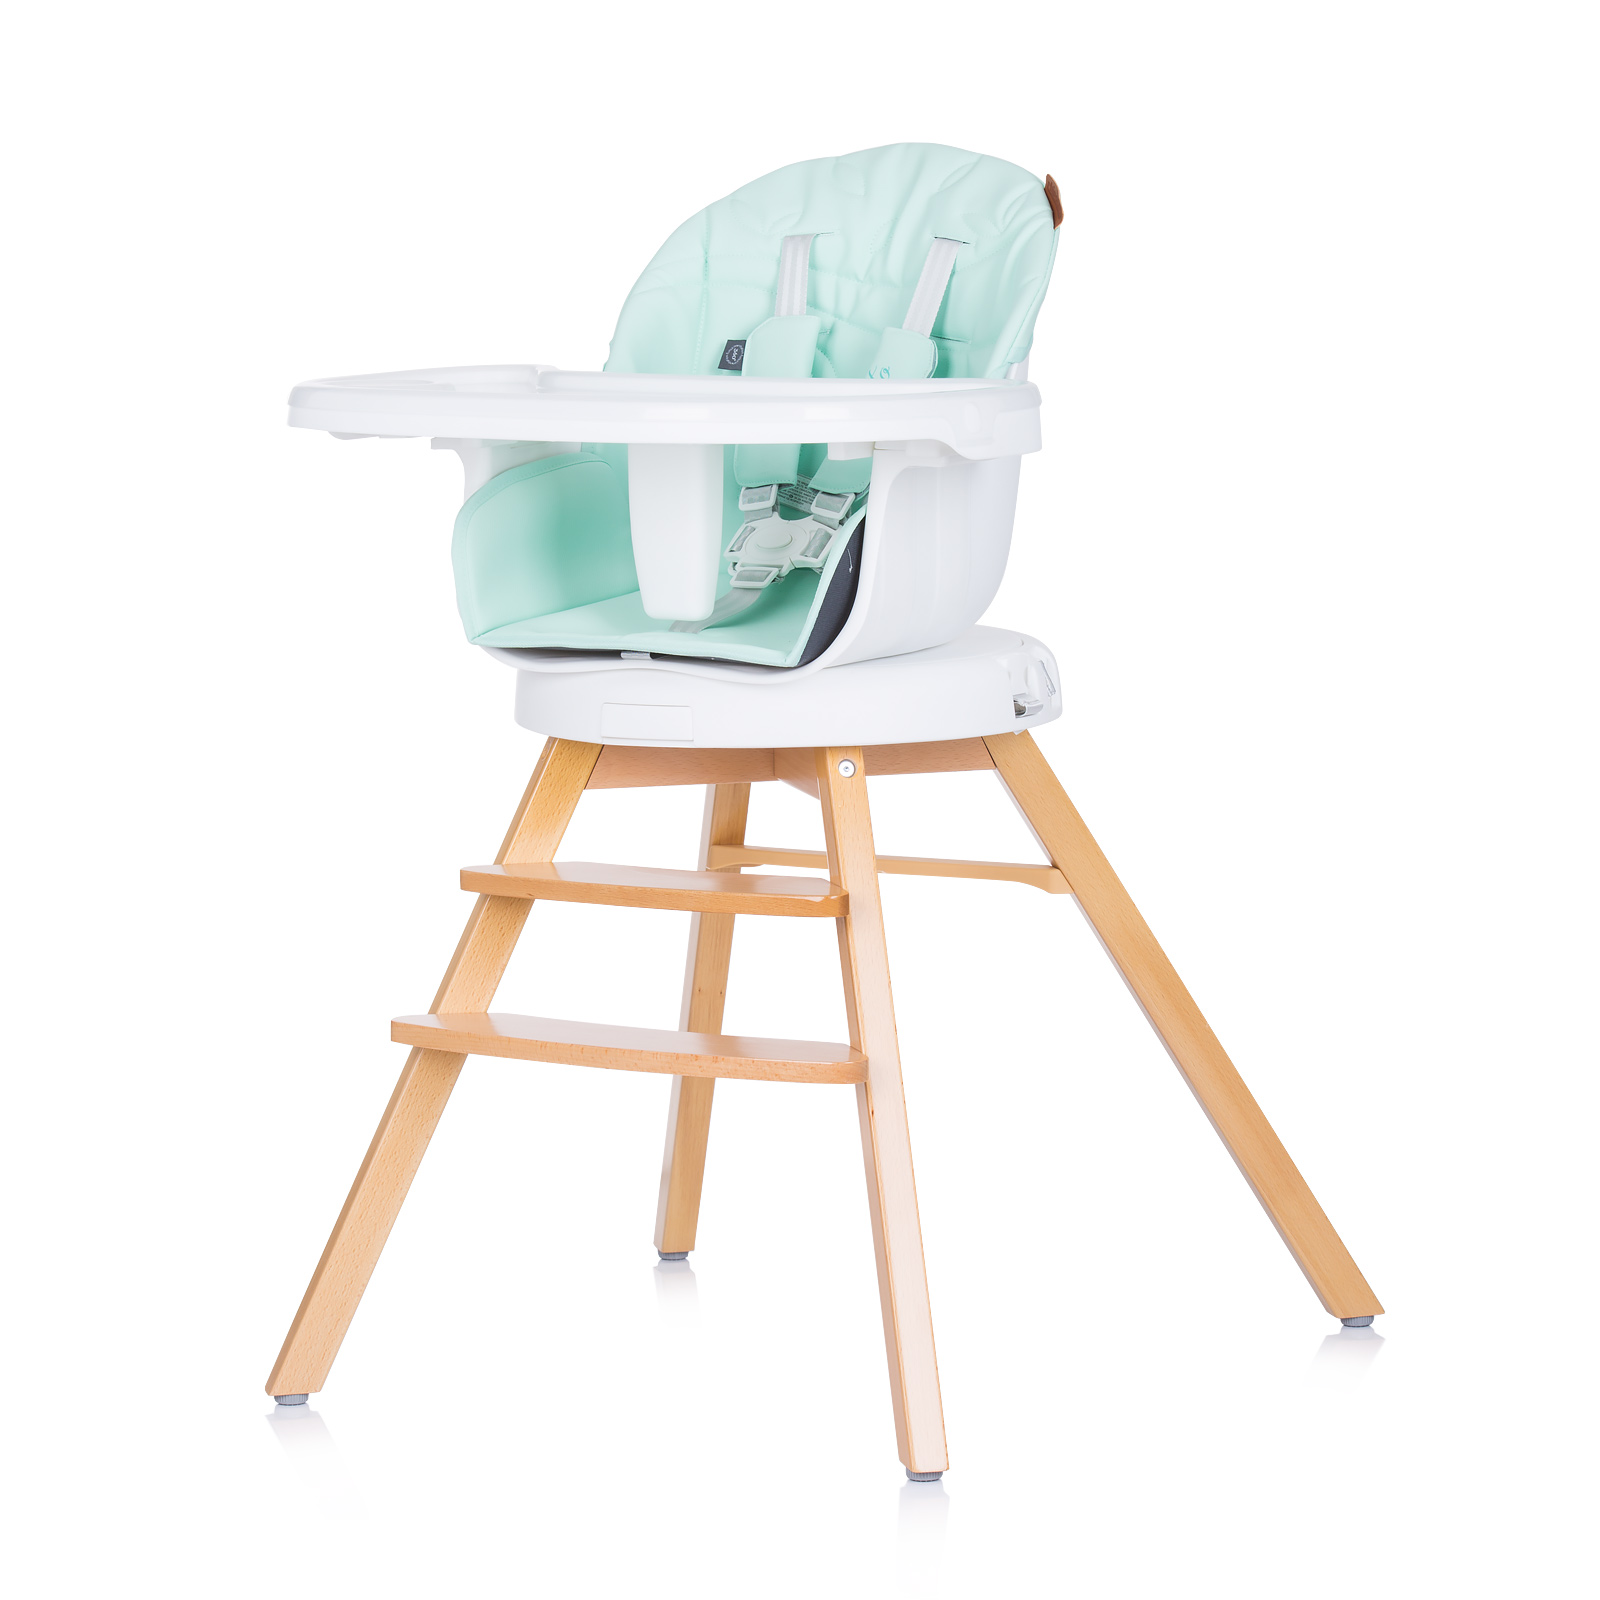 High chair 3 in 1 “Rotto” – Avocado